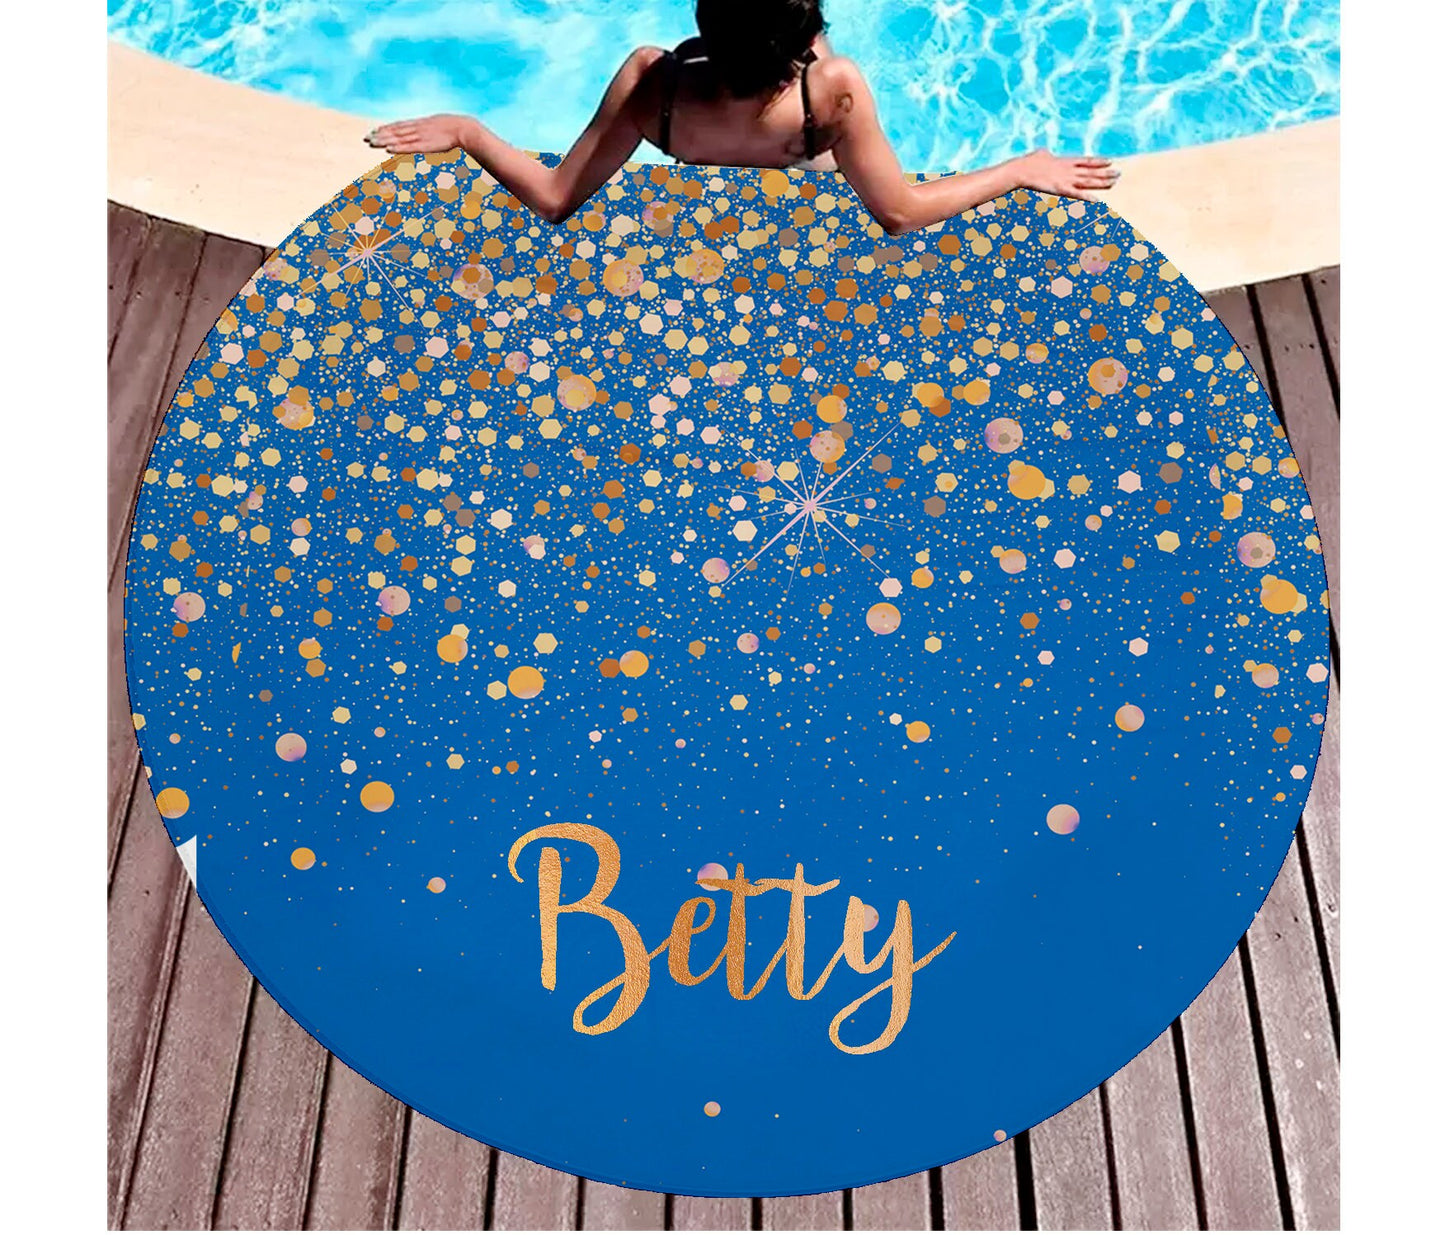 Personalized Round Glitter Style Beach Towel, Personalized Beach Towel Personalized Name Bath Towel Custom Pool Towel Birthday Vacation Gift